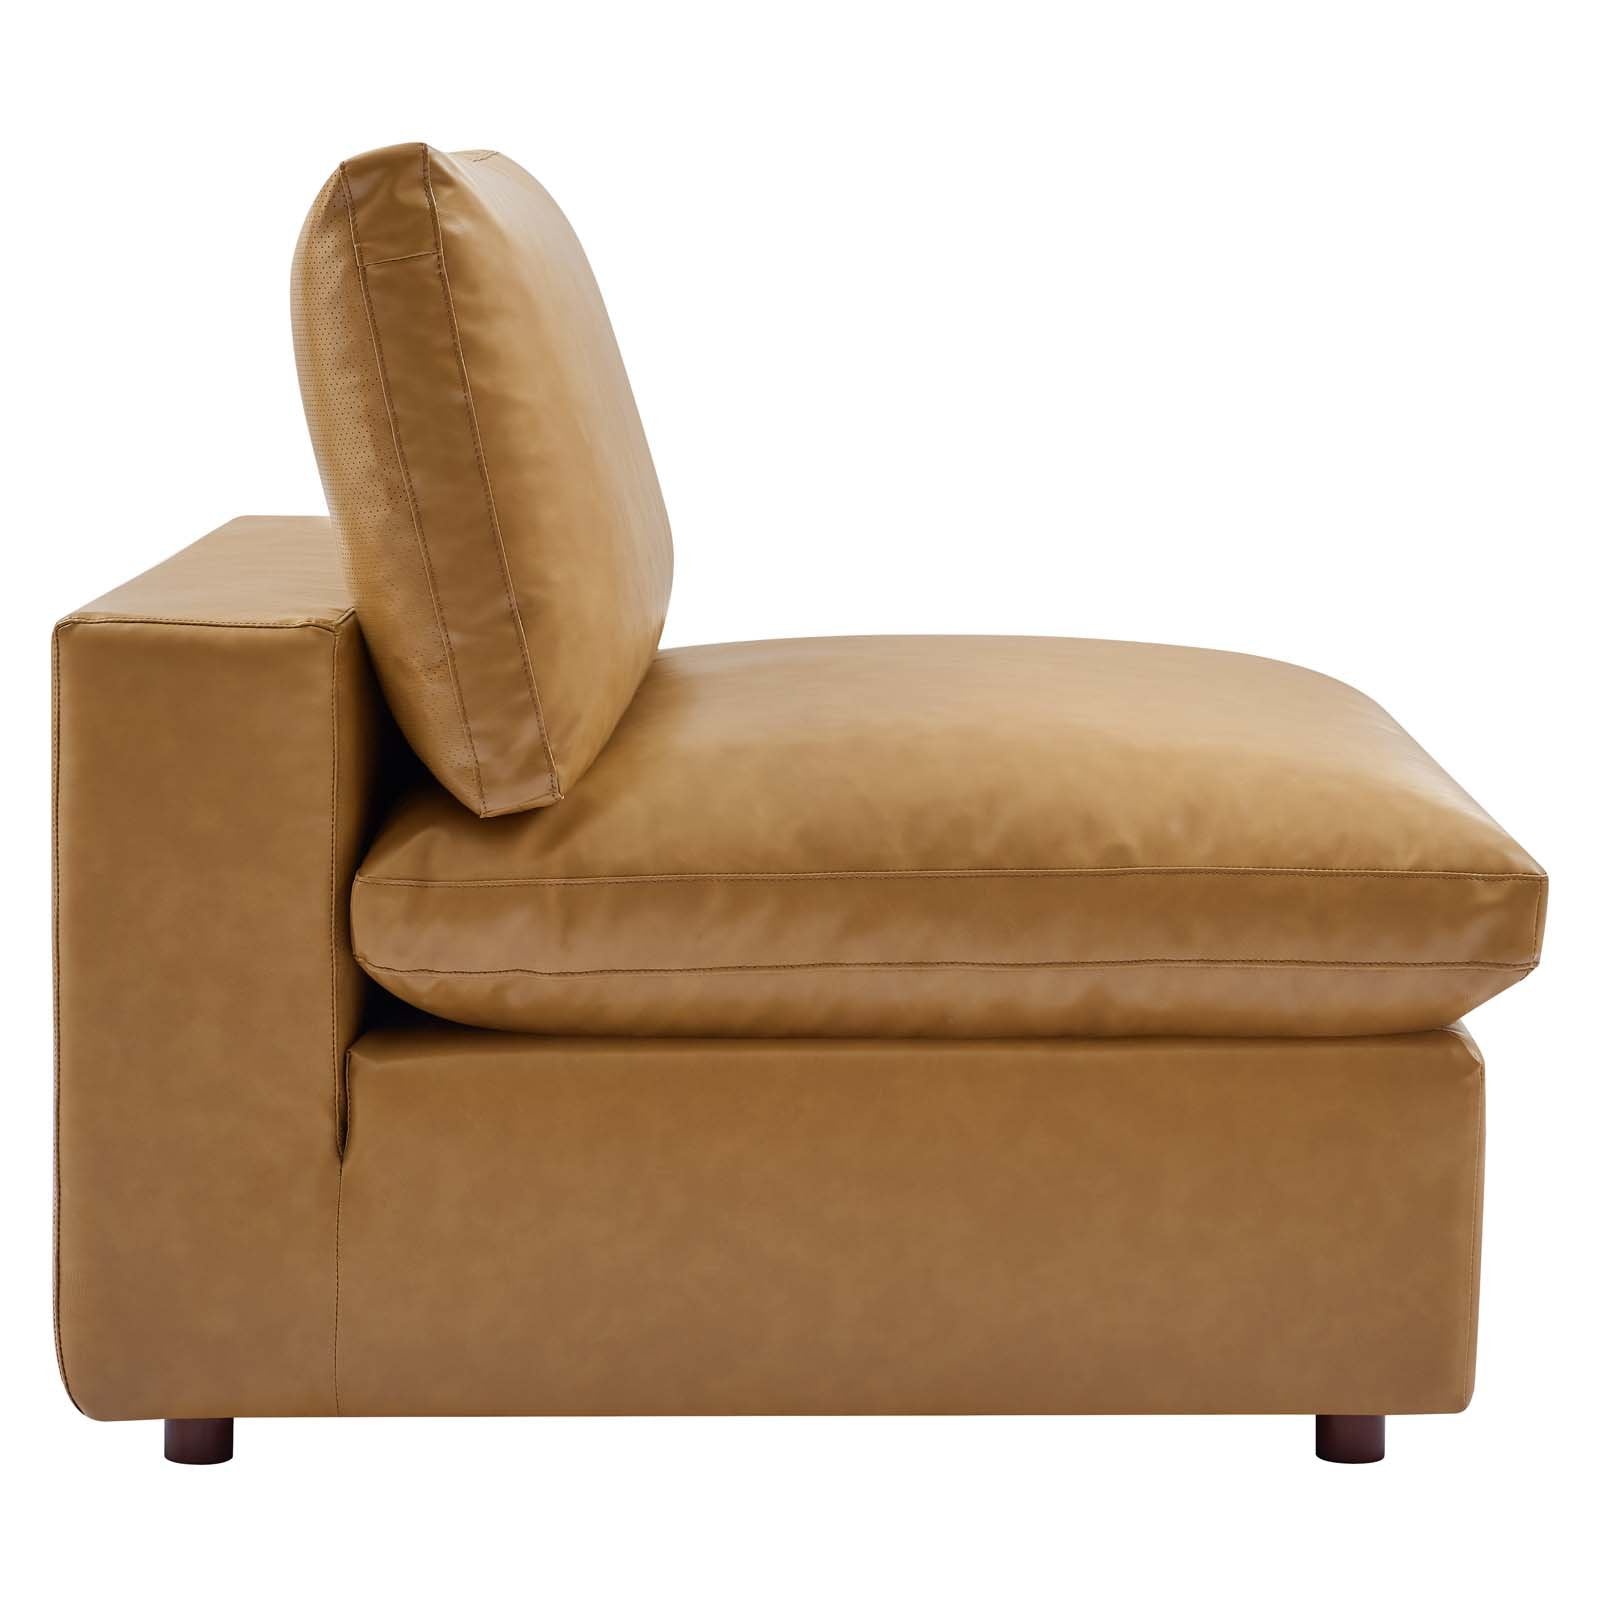 Commix Down Filled Overstuffed Vegan Leather Armless Chair - East Shore Modern Home Furnishings